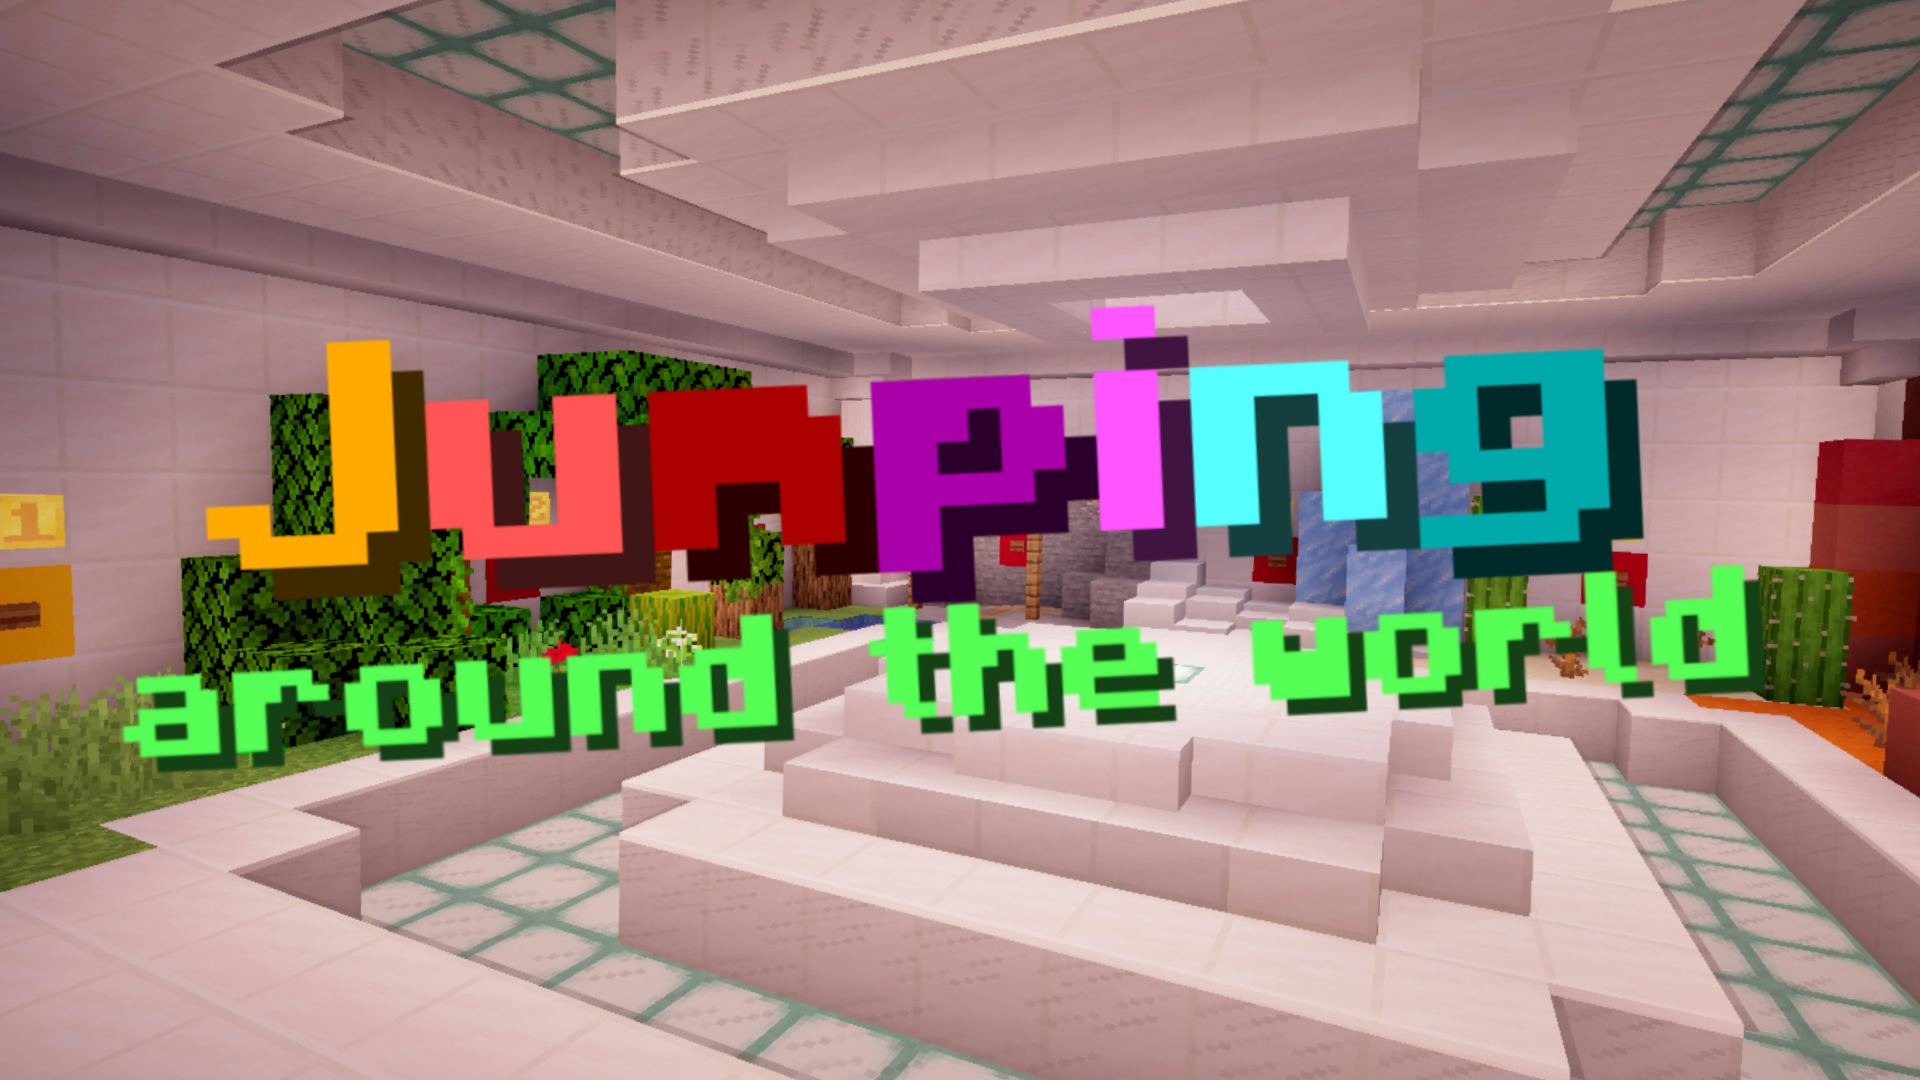 Download Jumping Around the World for Minecraft 1.13.2